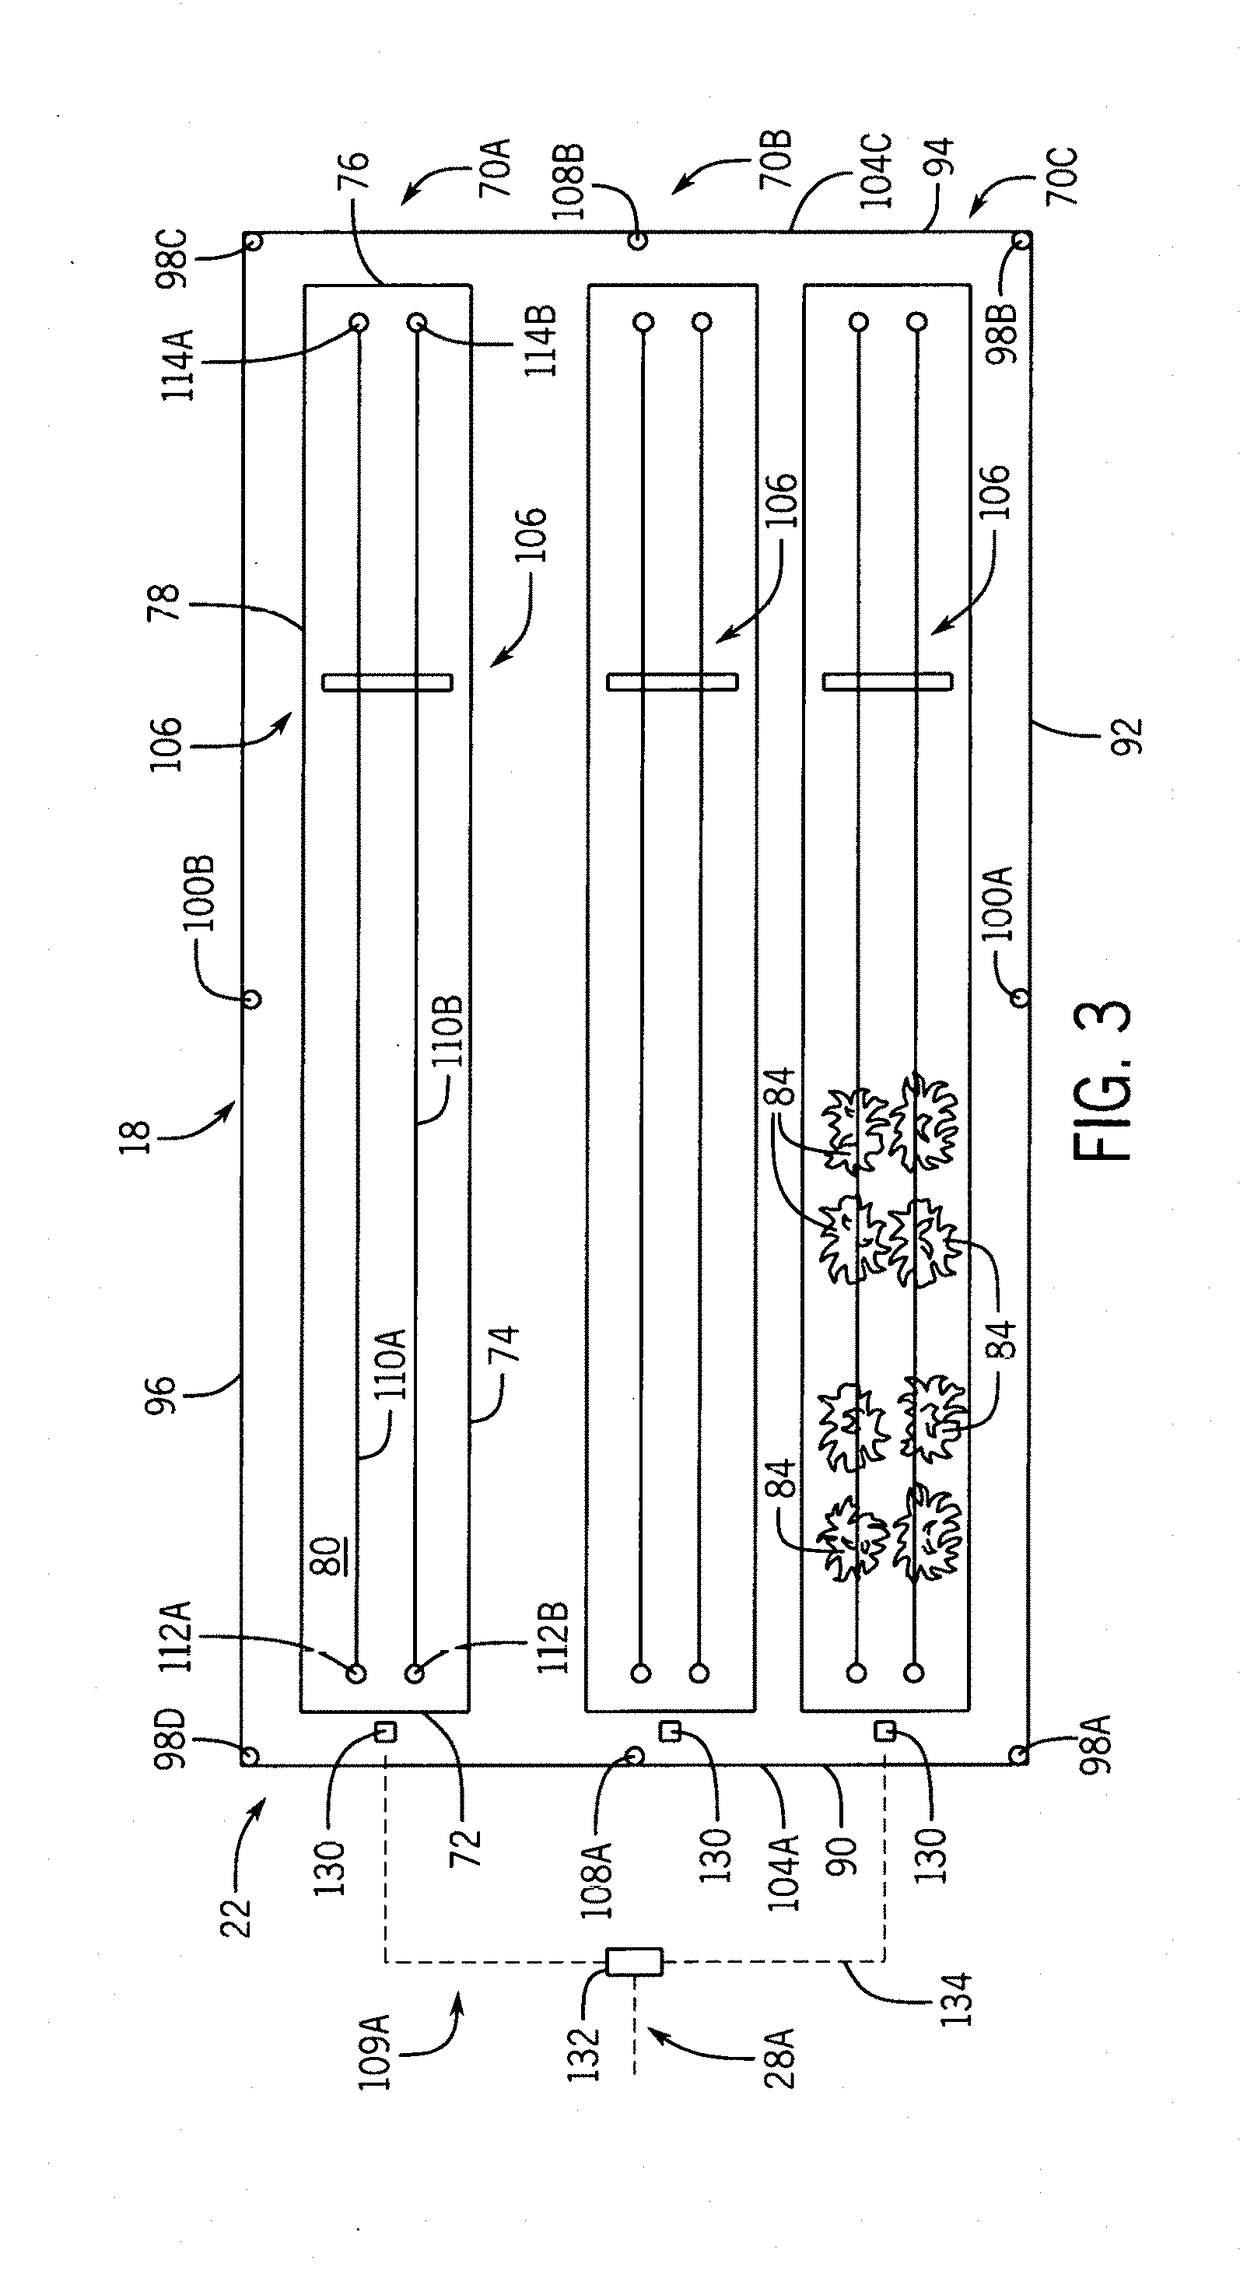 System for promoting plant growth and production